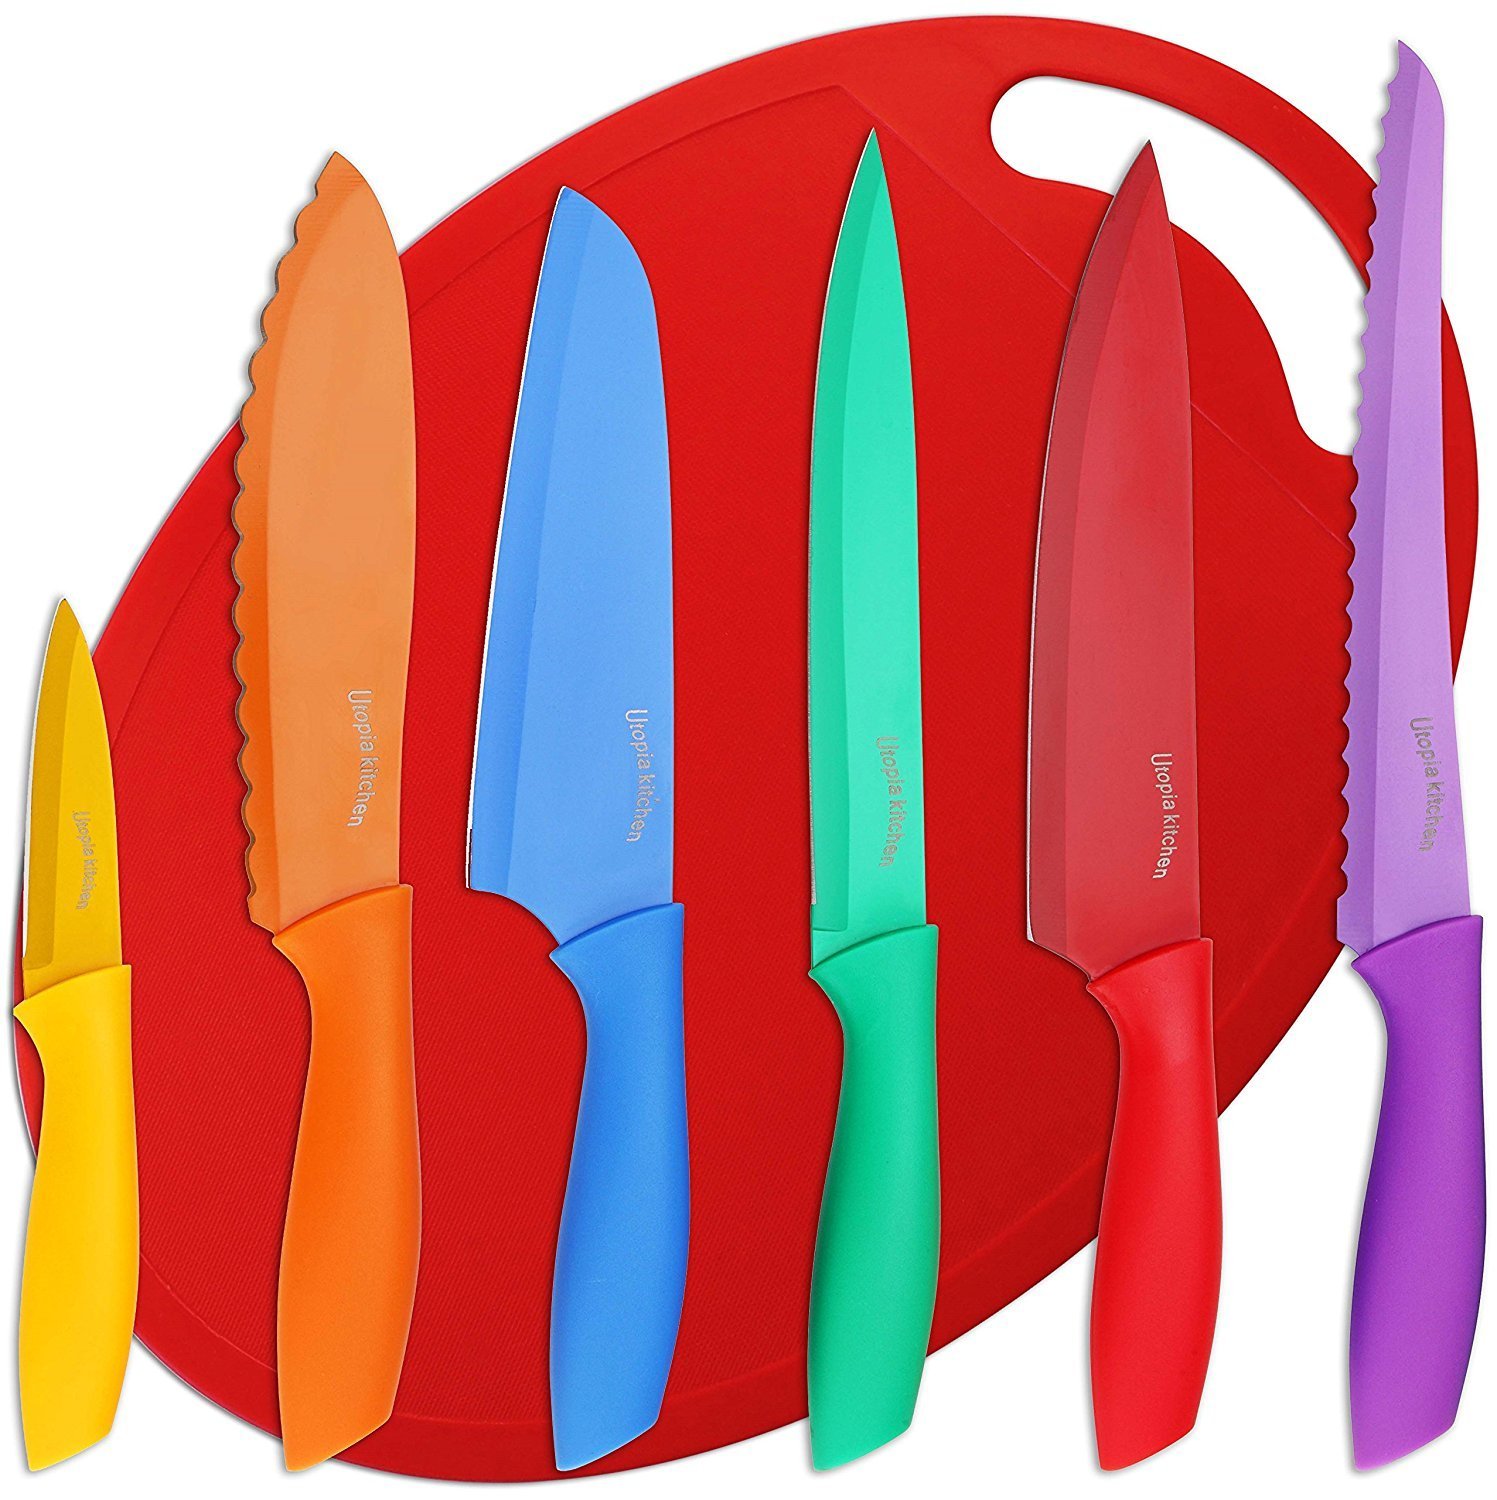 Utopia Kitchen 7 Piece Color-Coded Non-Stick Knife Set – Just $9.99!